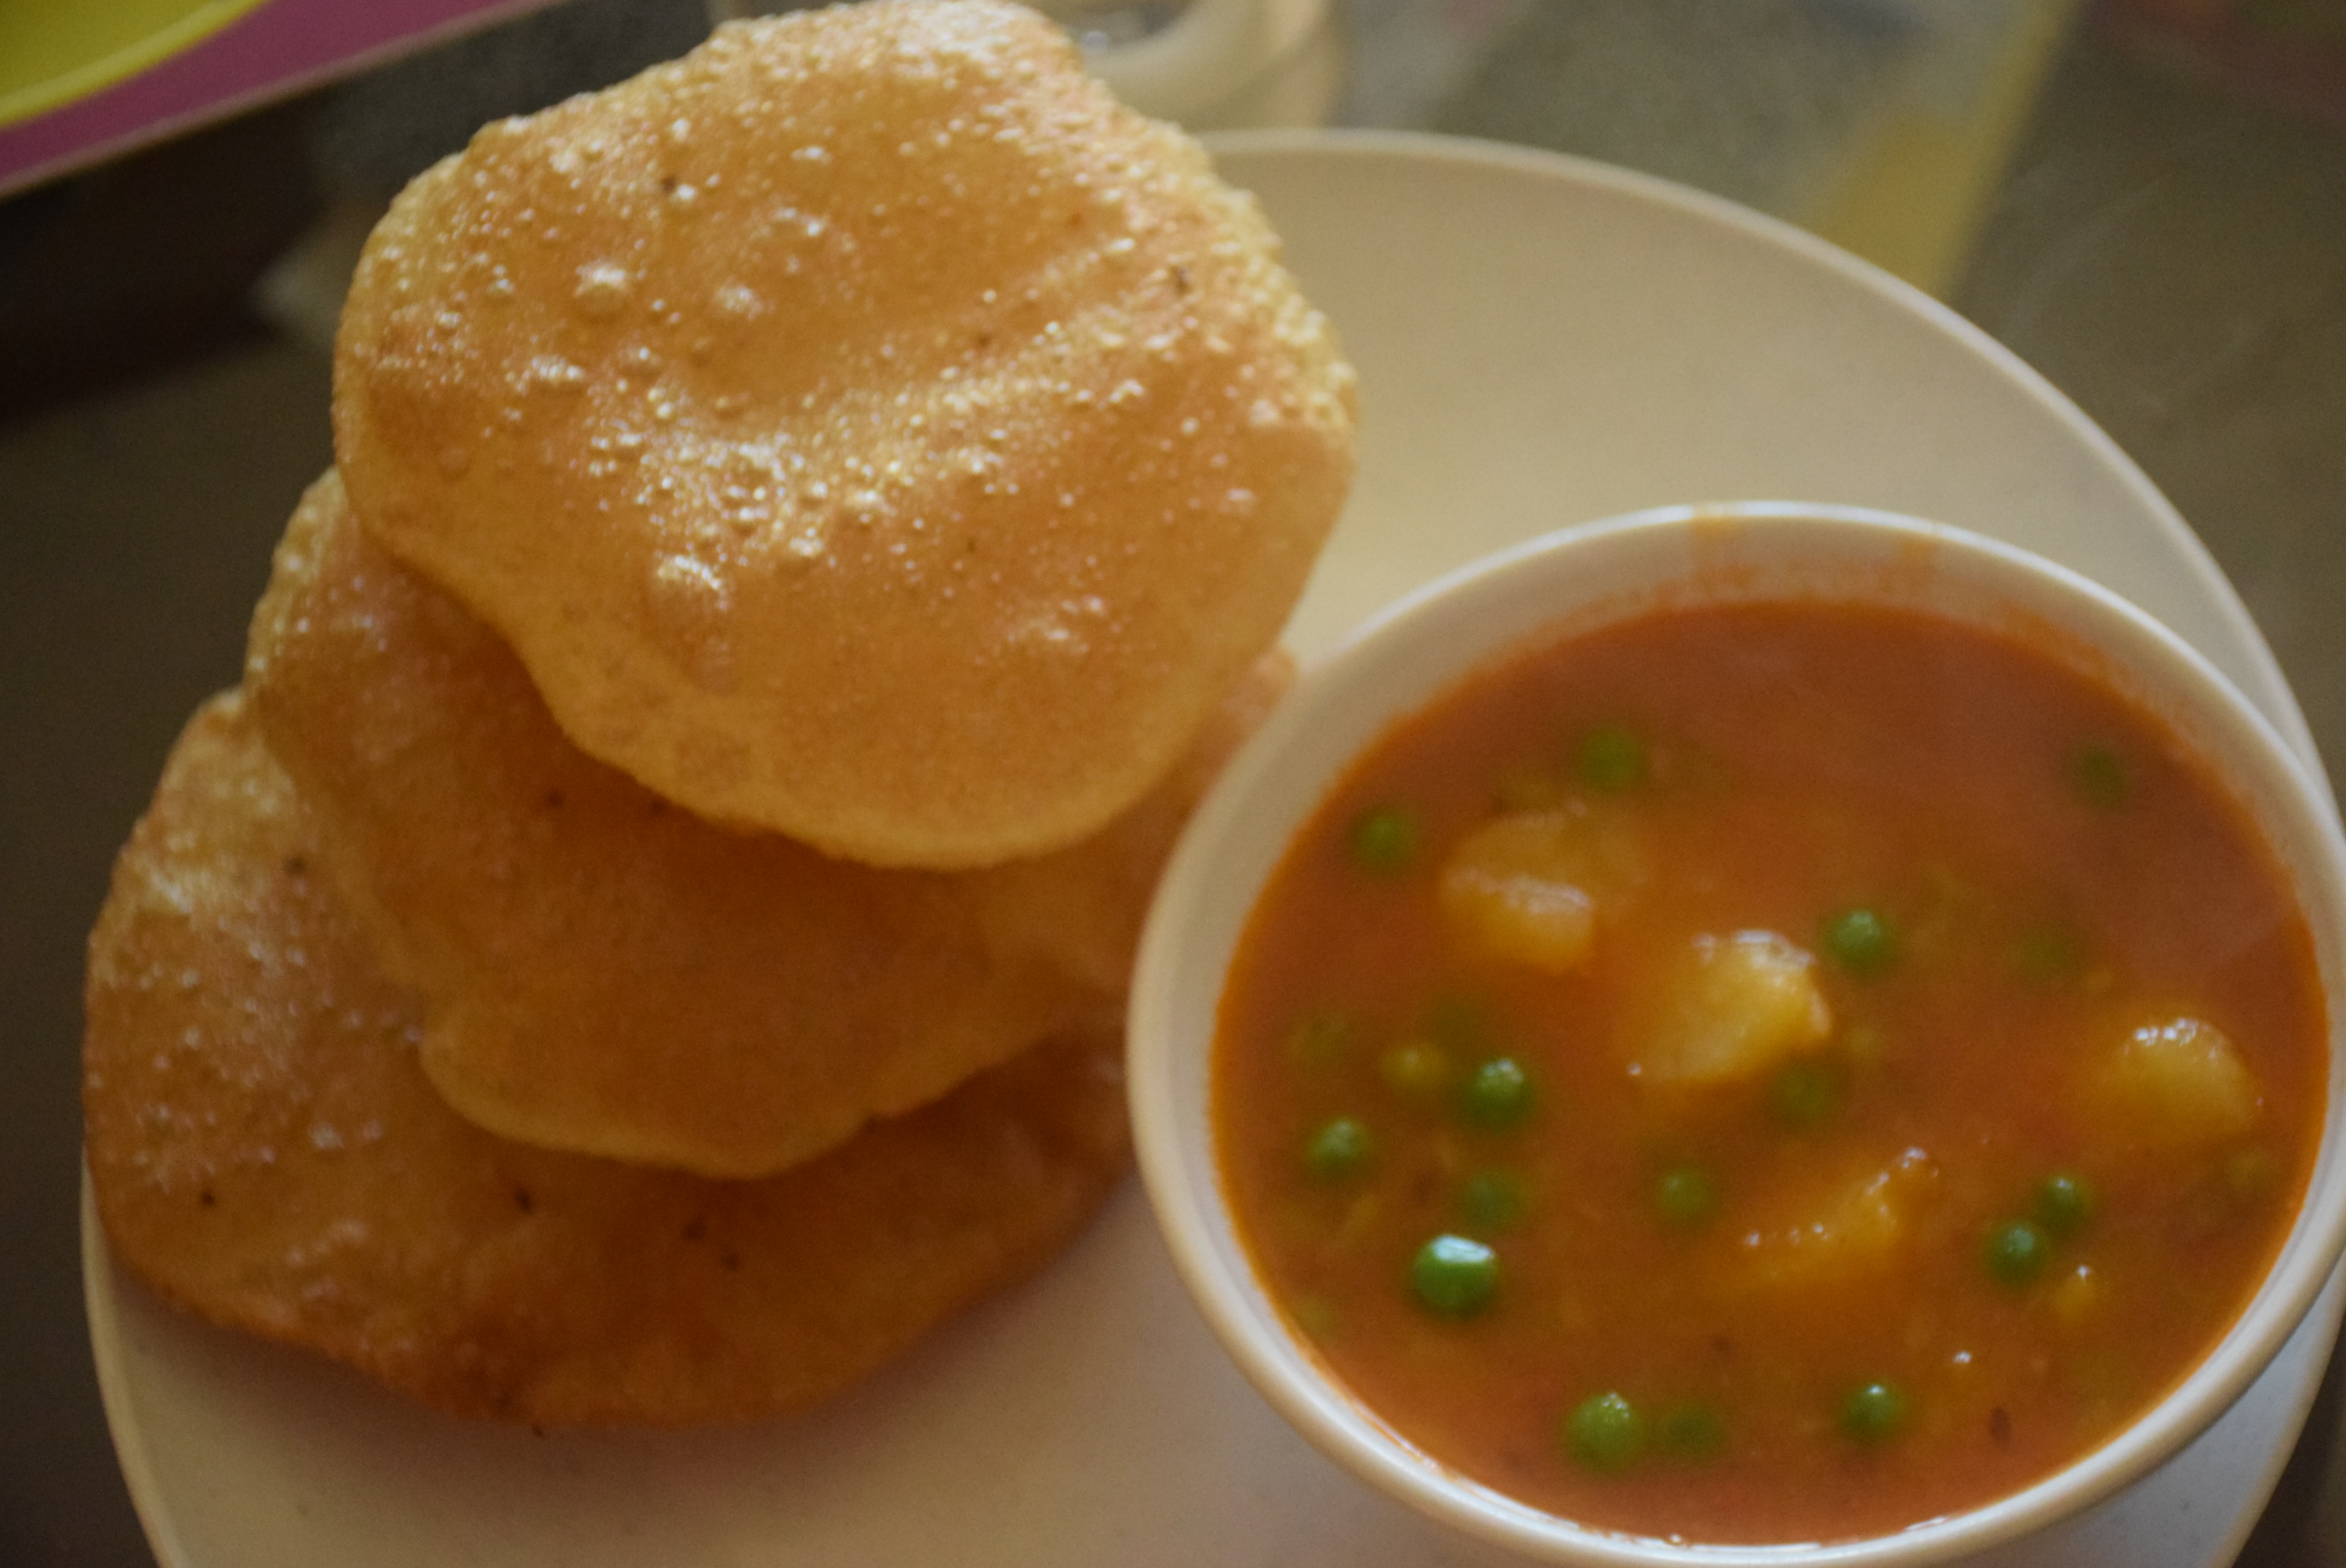 Served with puris